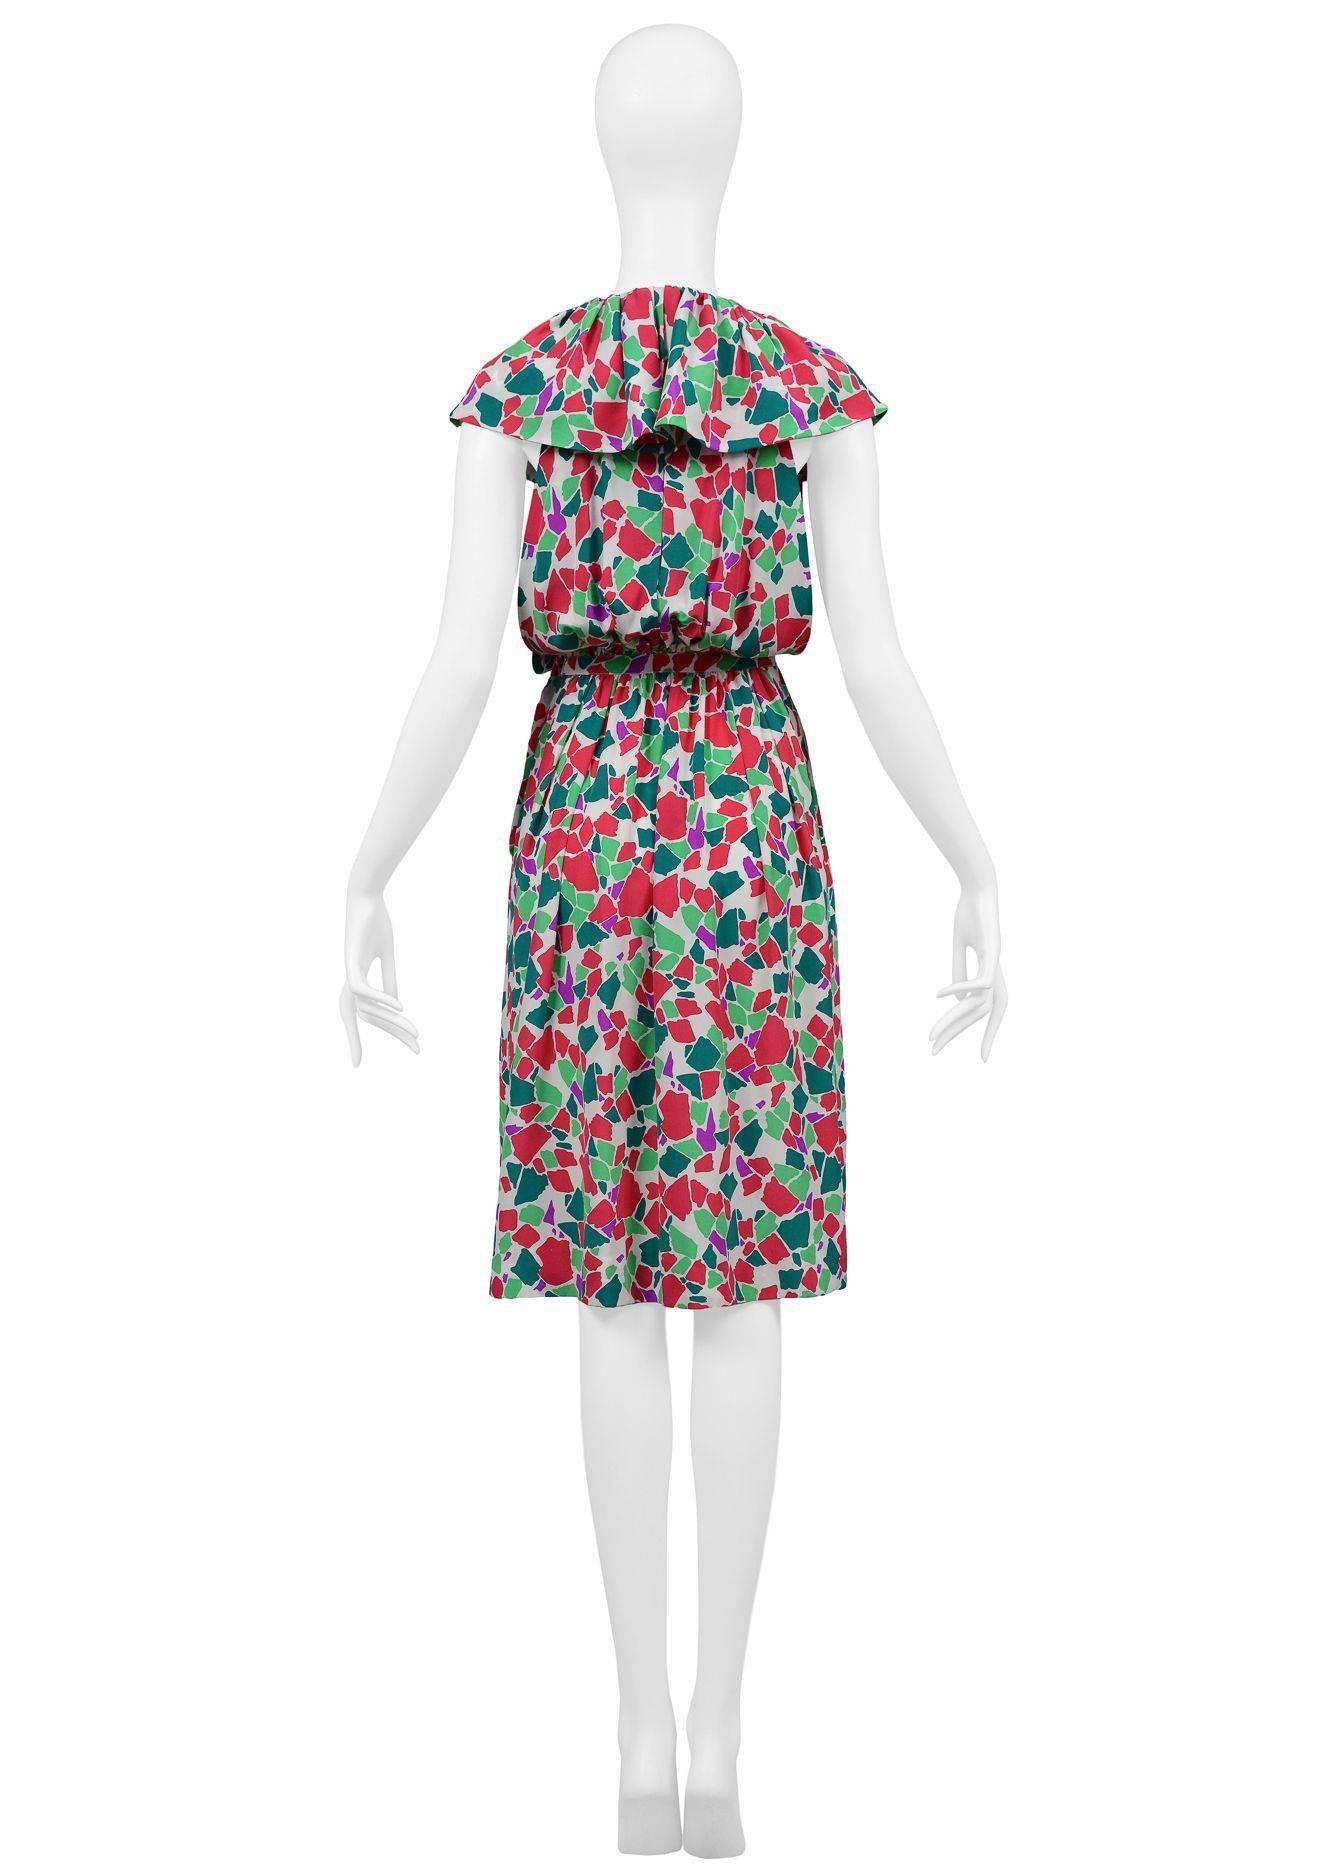 Yves Saint Laurent Abstract Keyhole Dress In Excellent Condition For Sale In Los Angeles, CA